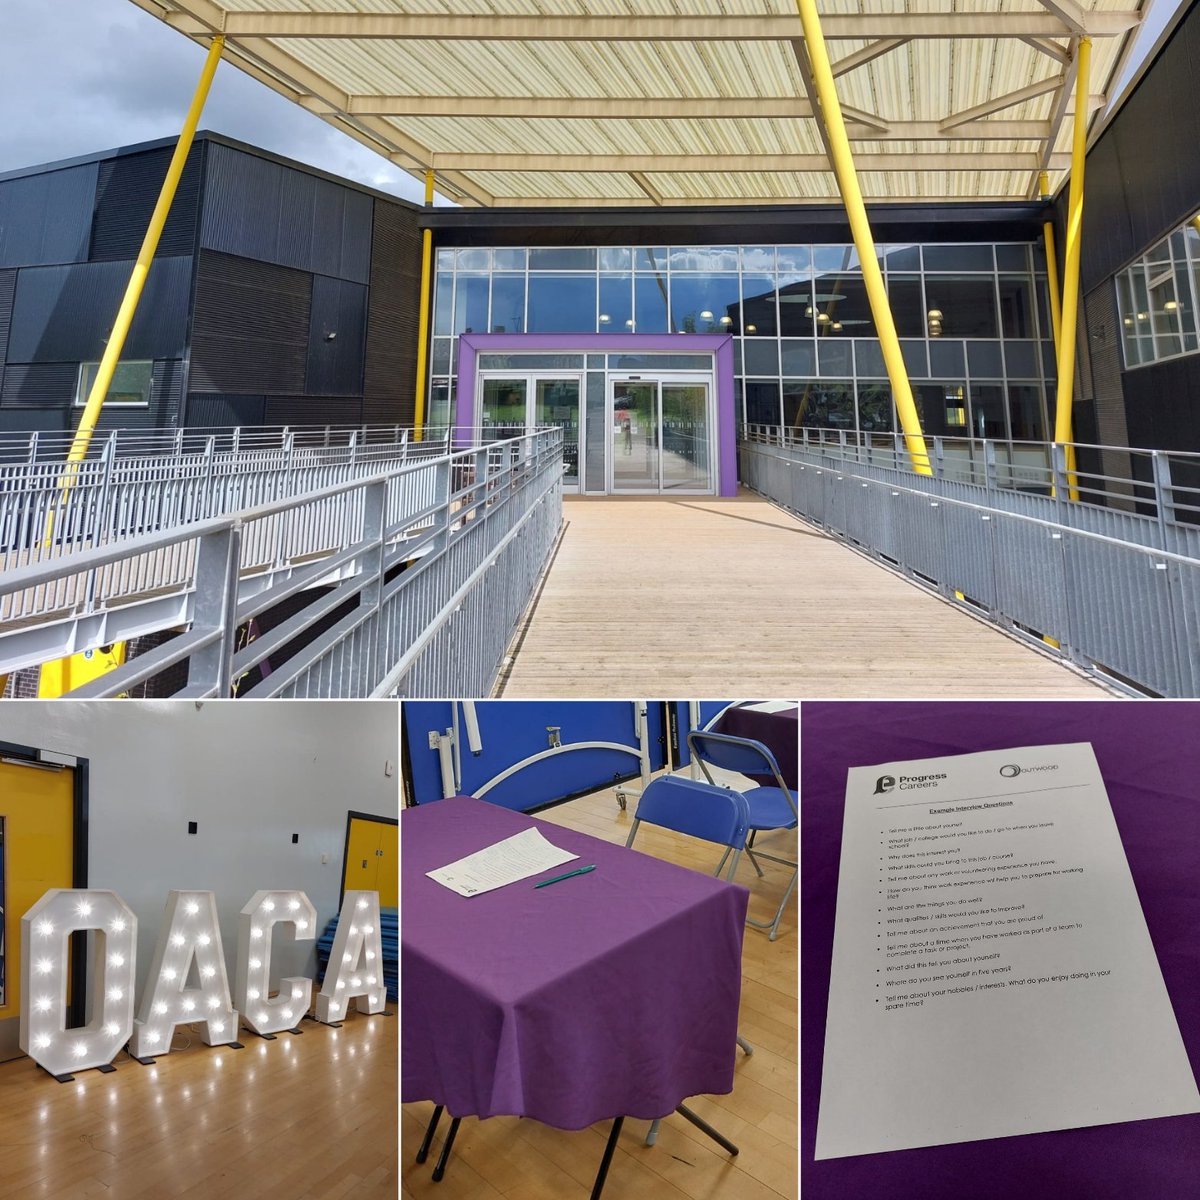 Rachel and Emily from our accounts team popped through to Outwood Academy Carlton today to help the Year 11 students with their #MockInterview day.

#TeamHarrisAndCo #YouAndUs #PeopleMatter